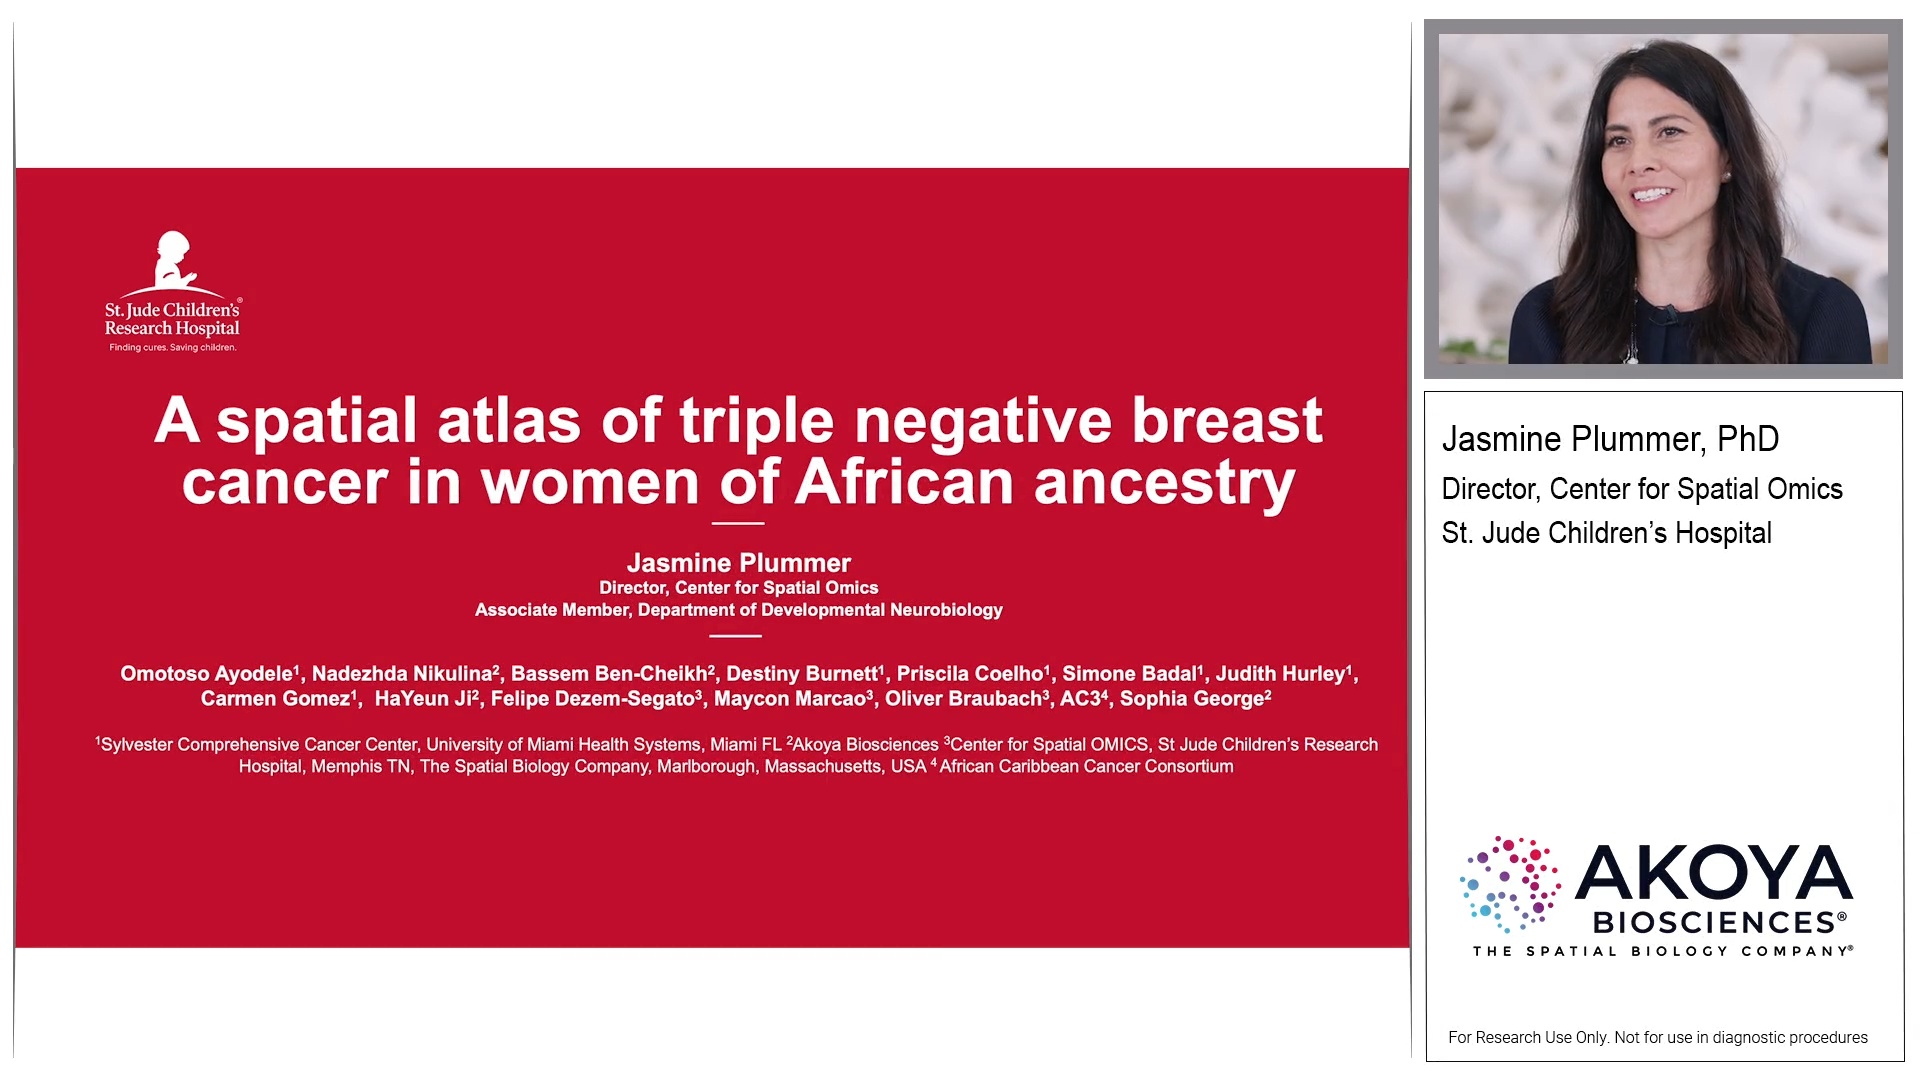 A Spatial Atlas of Triple Negative Breast Cancer in Women of African Ancestry